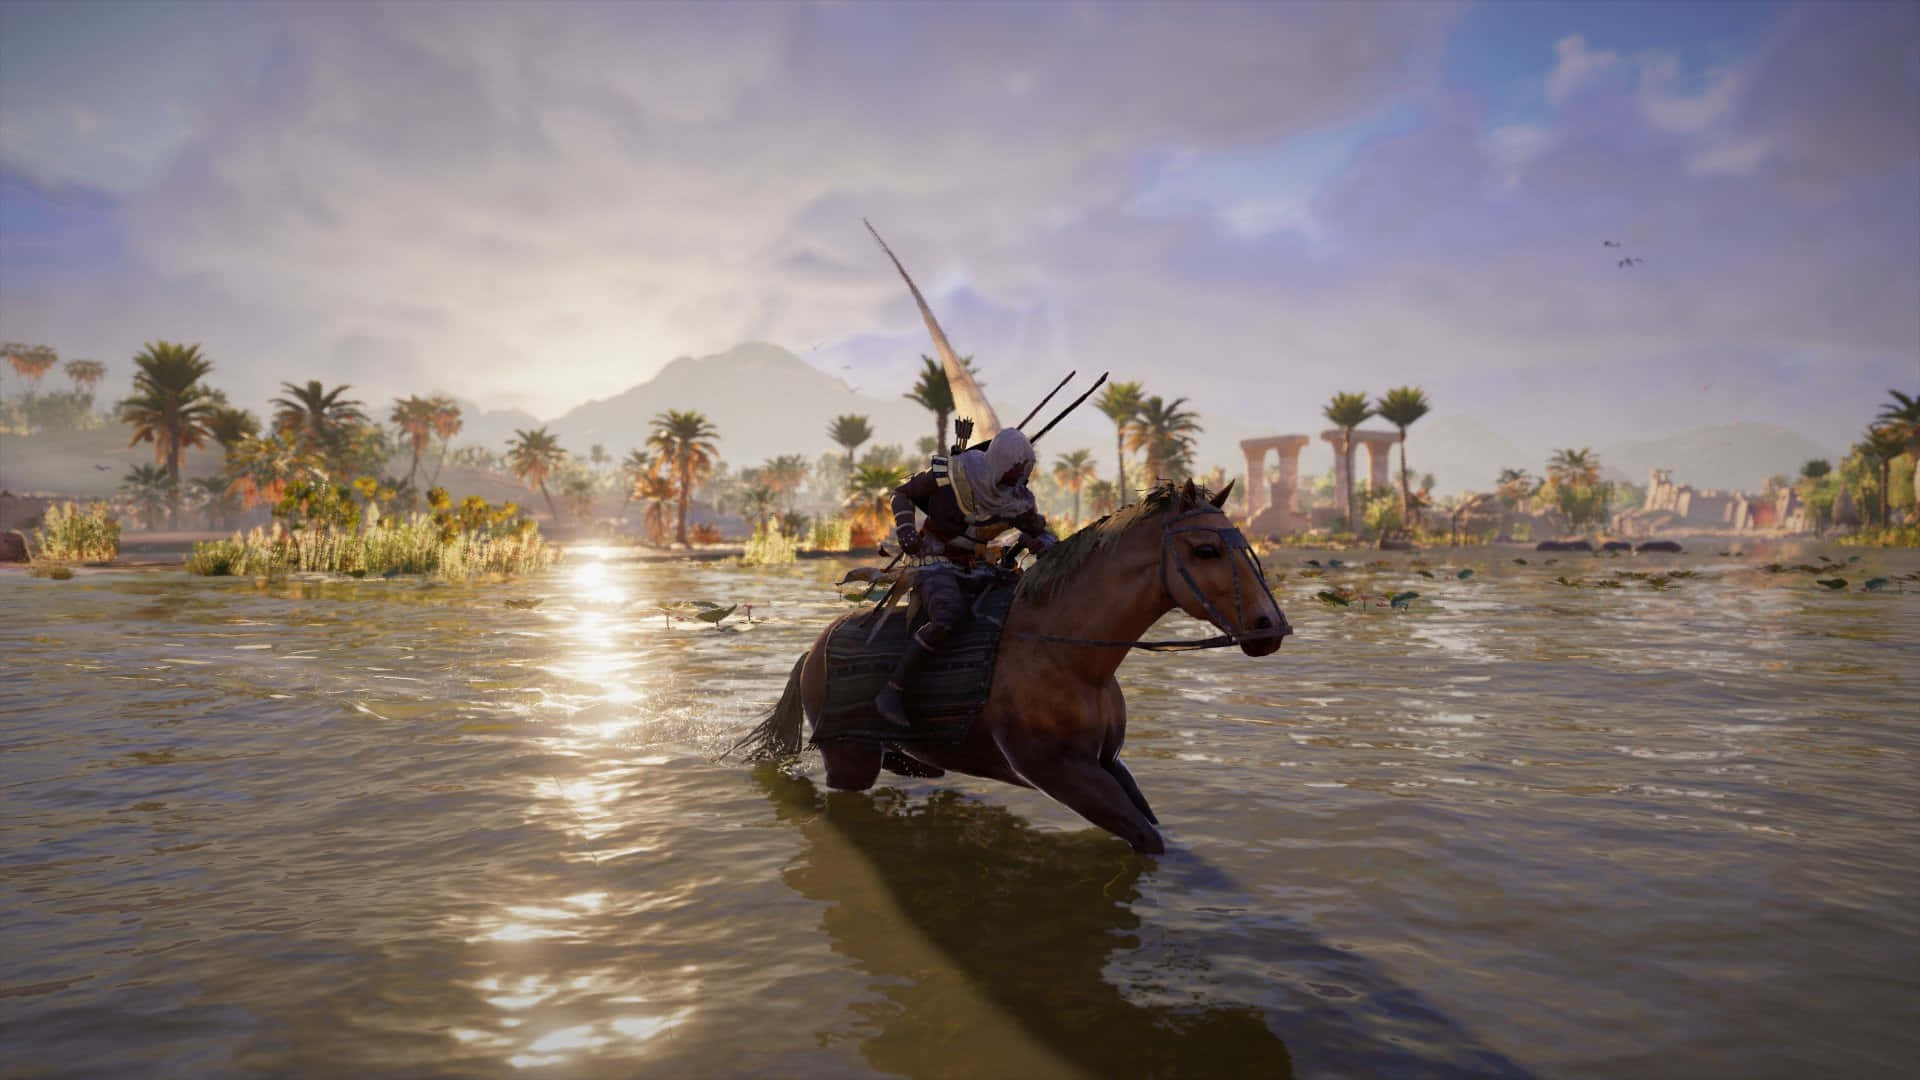 Explore Egypt with Bayek in Assassin's Creed Origins